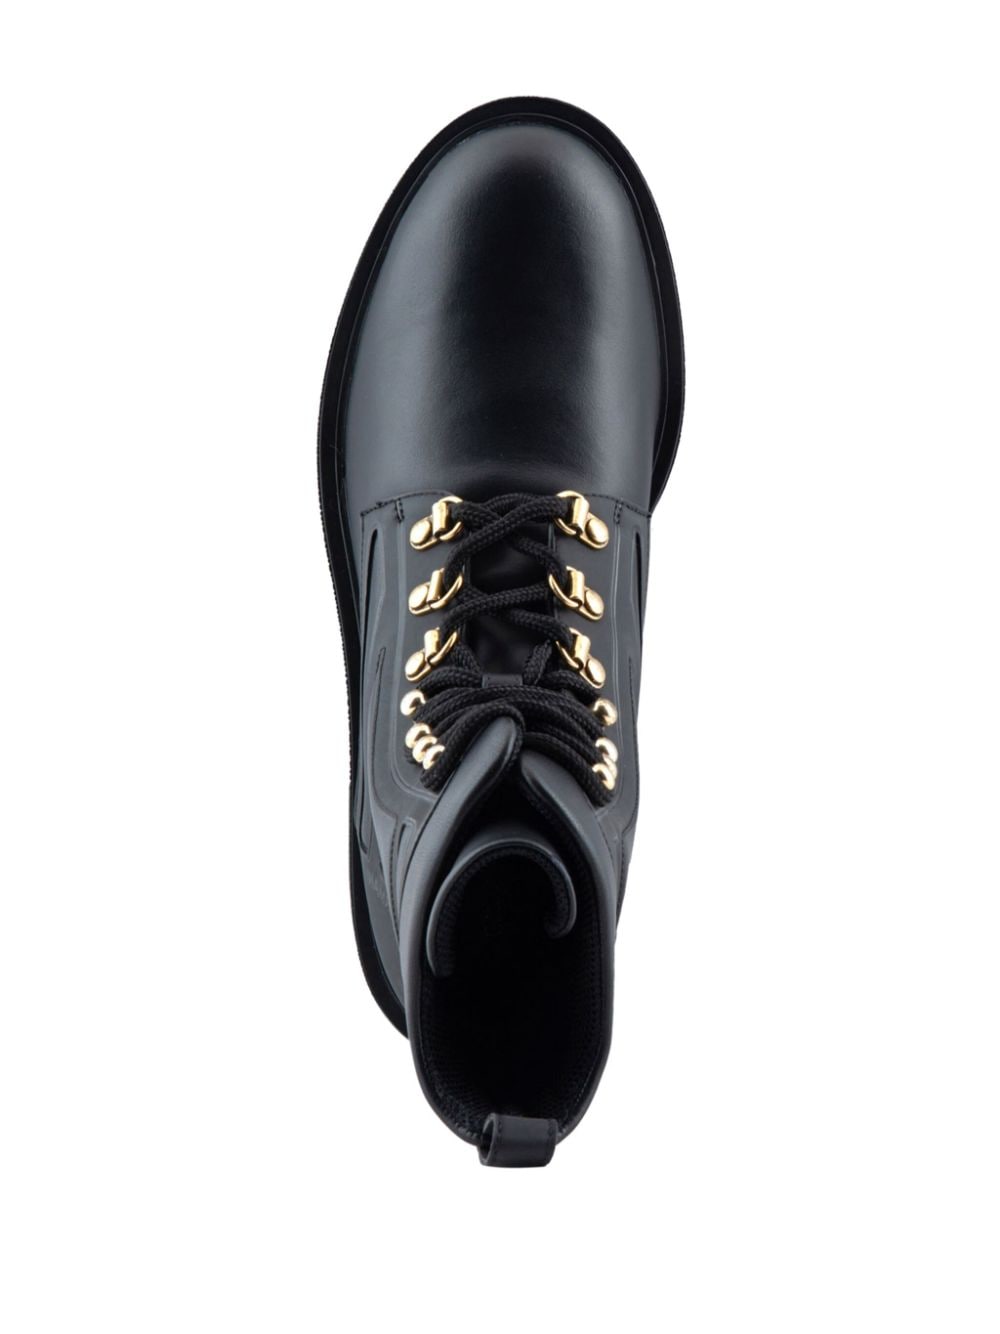 Emporio Armani lace-up leather boots Black